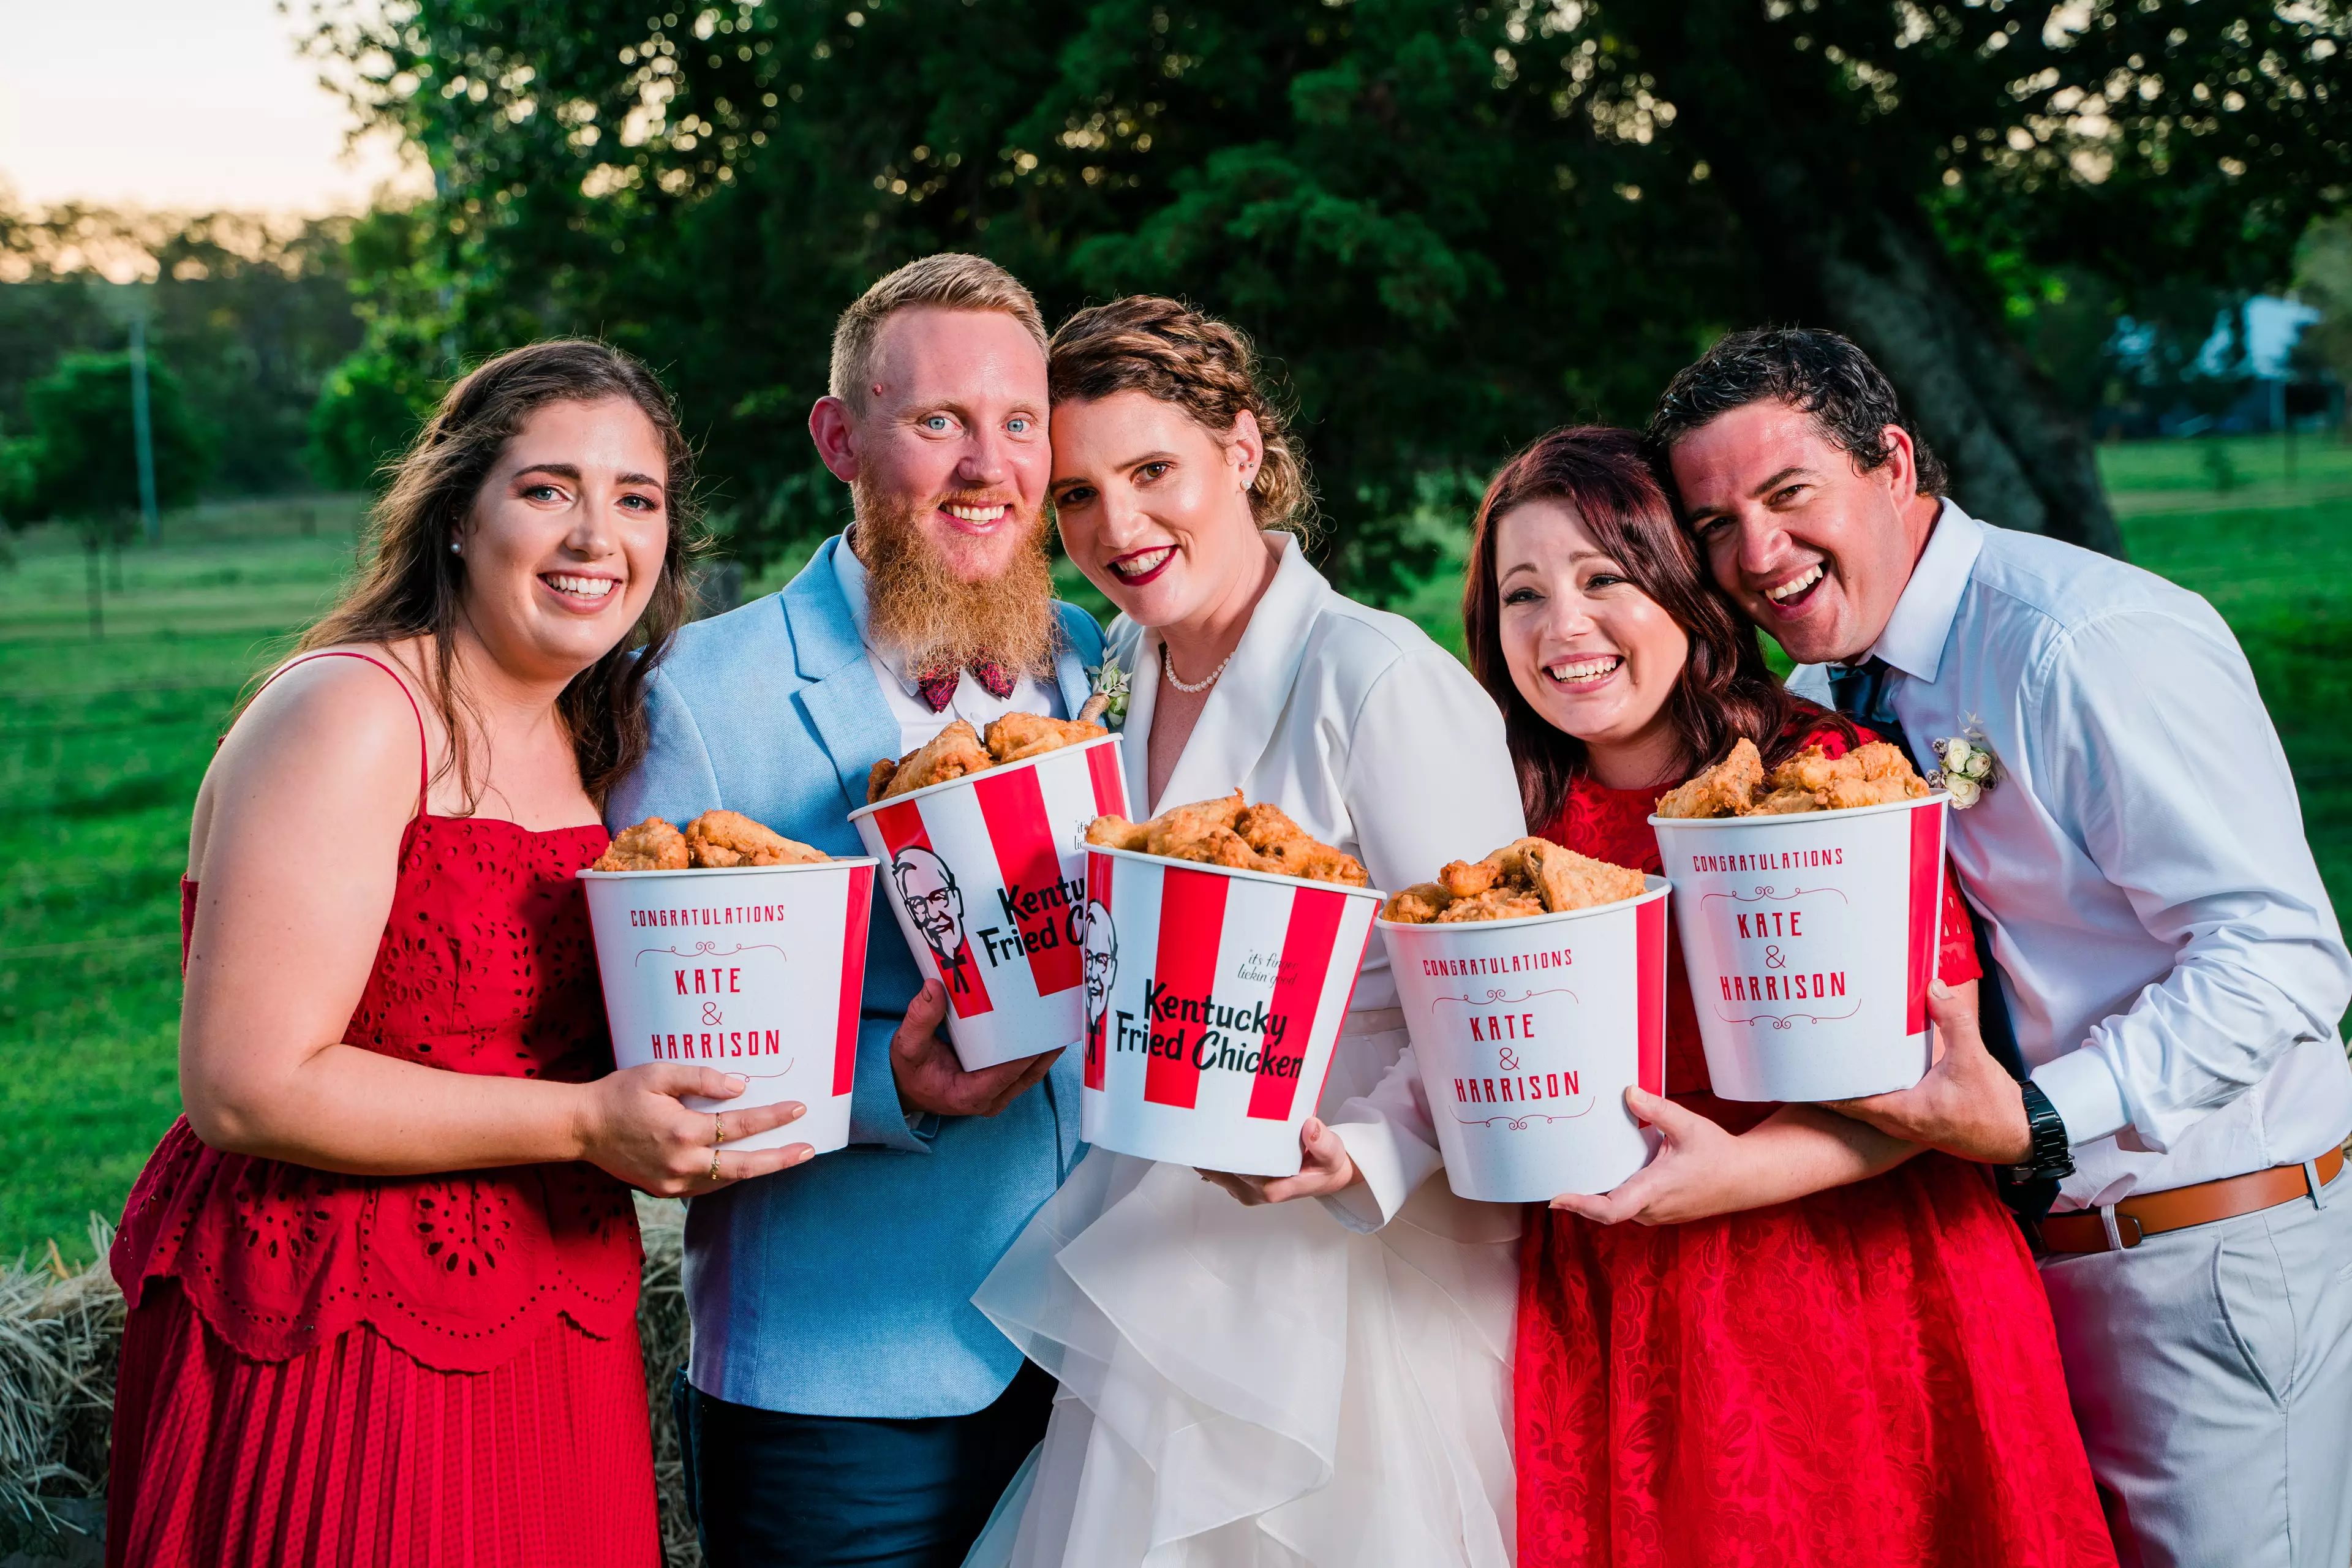 Kate and Harrison Cann are the first couple to have an official KFC wedding.